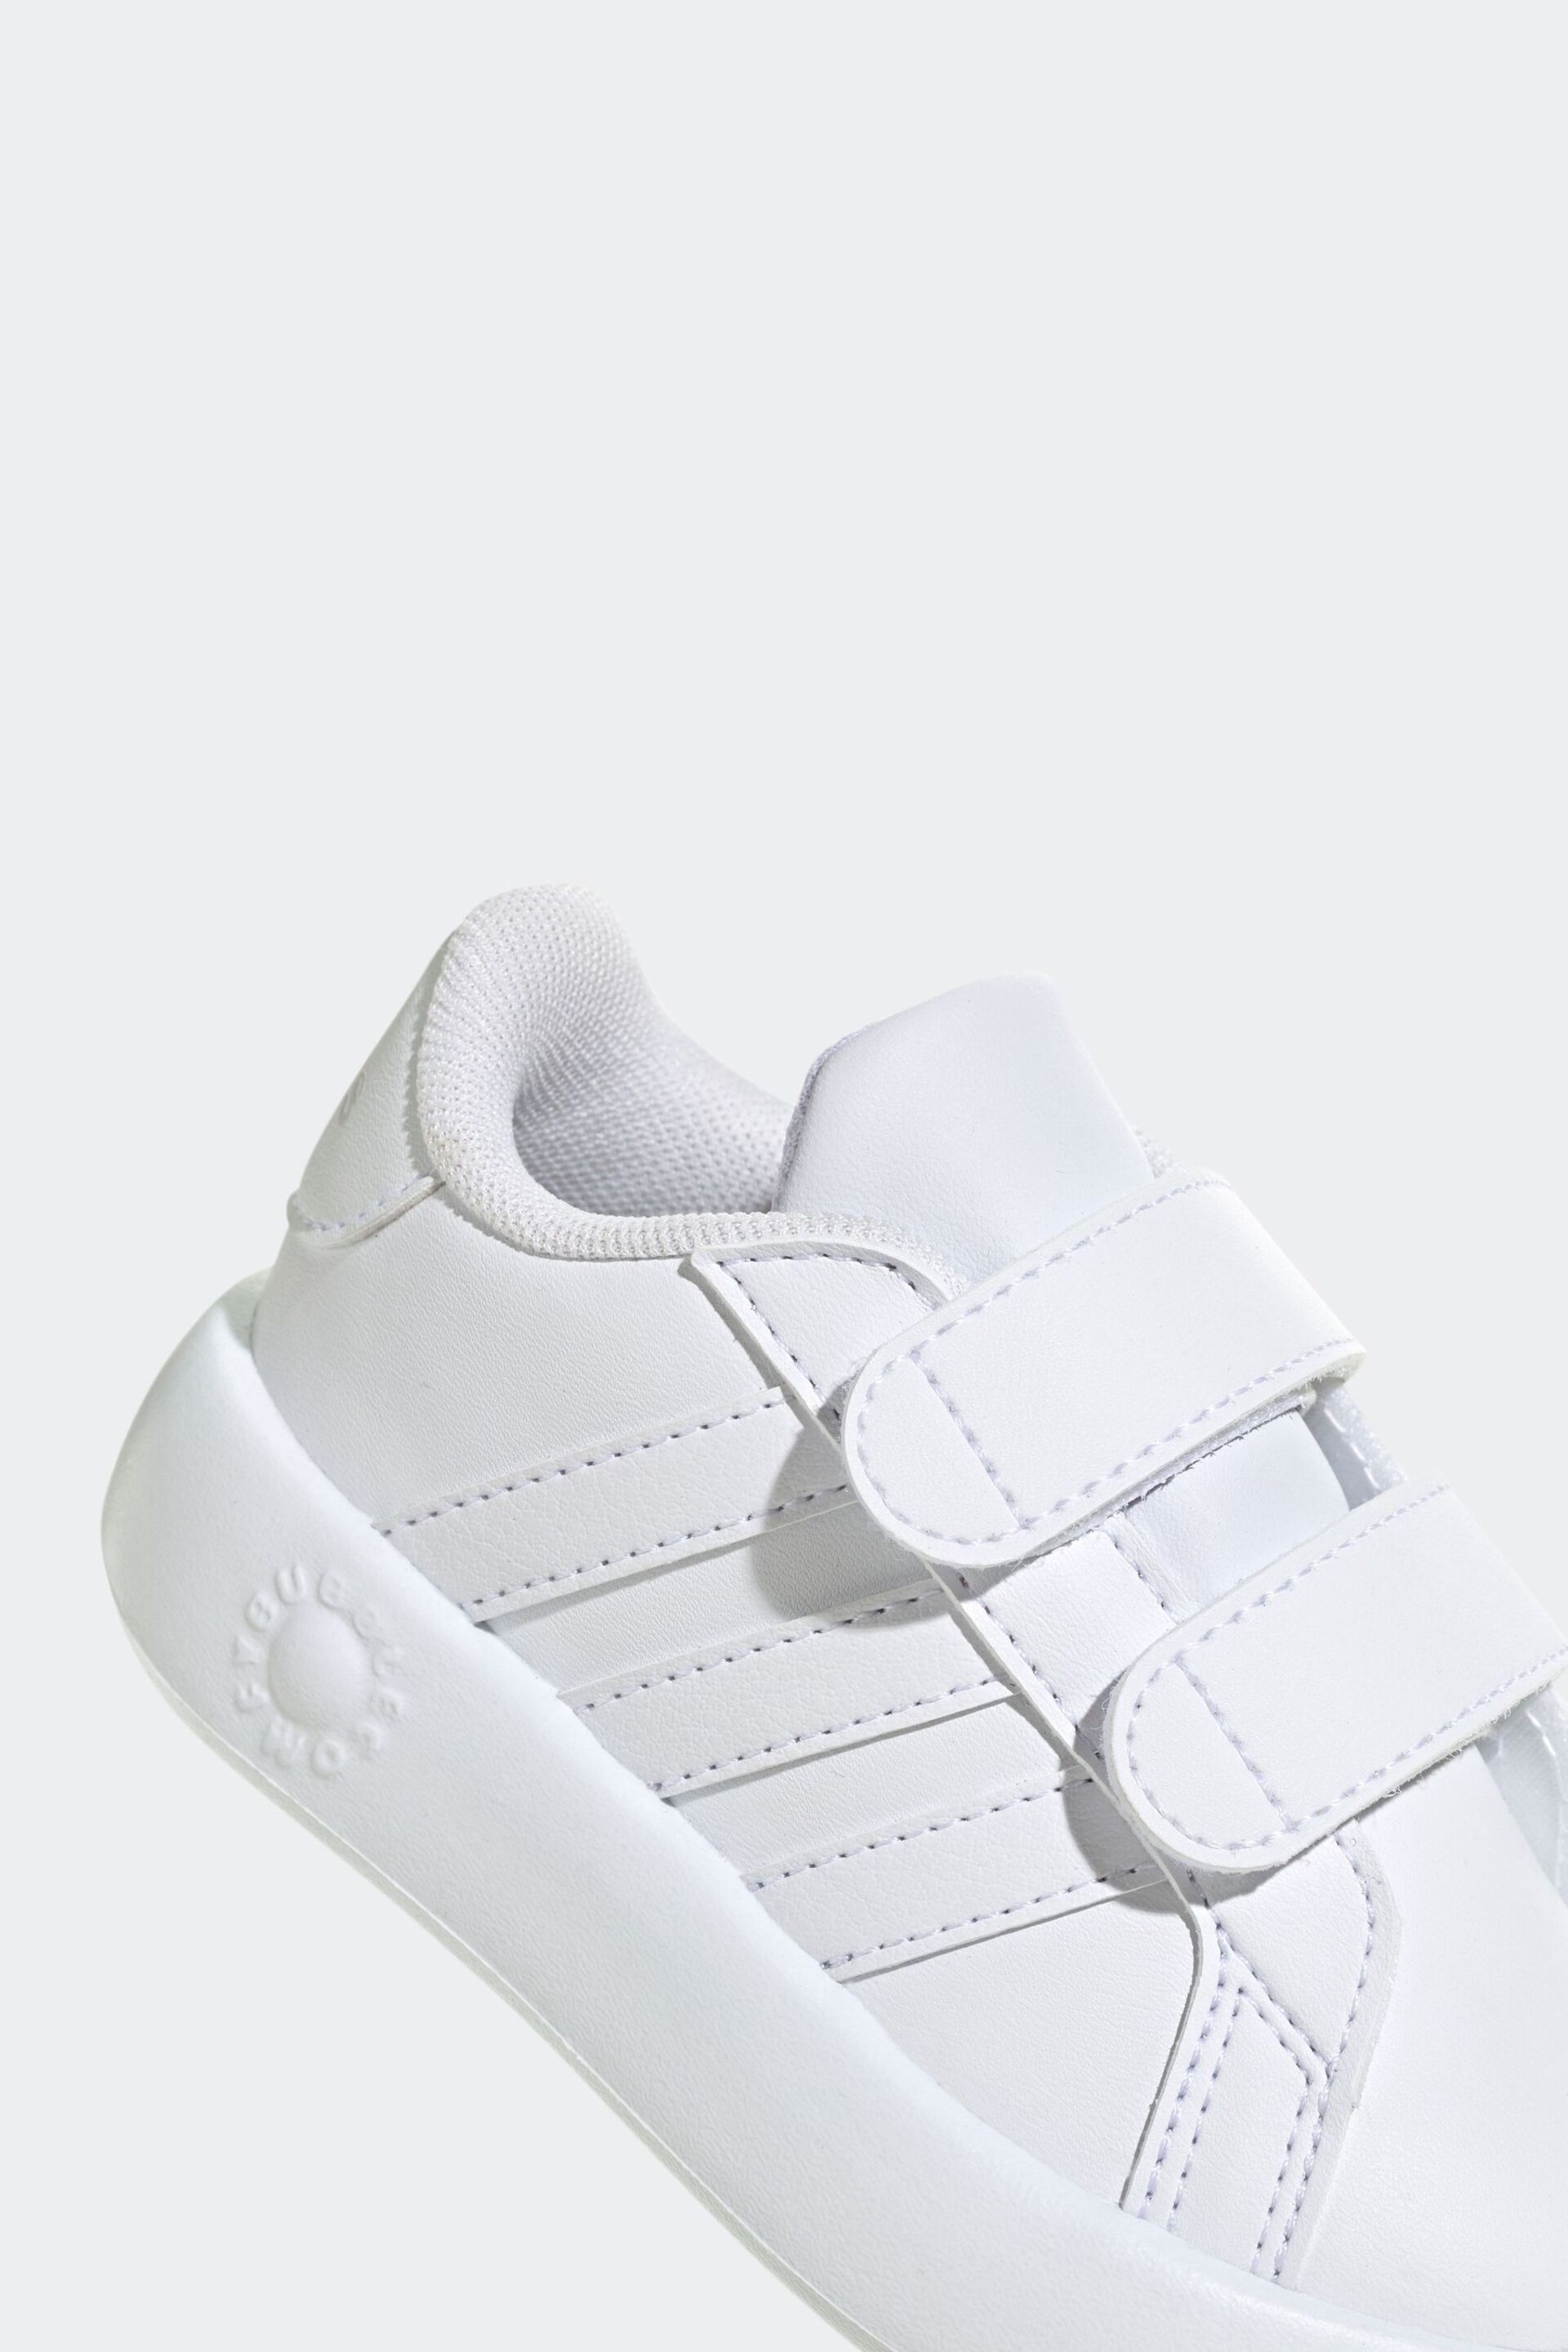 adidas White Kids Grand Court 2.0 Shoes - Image 8 of 8